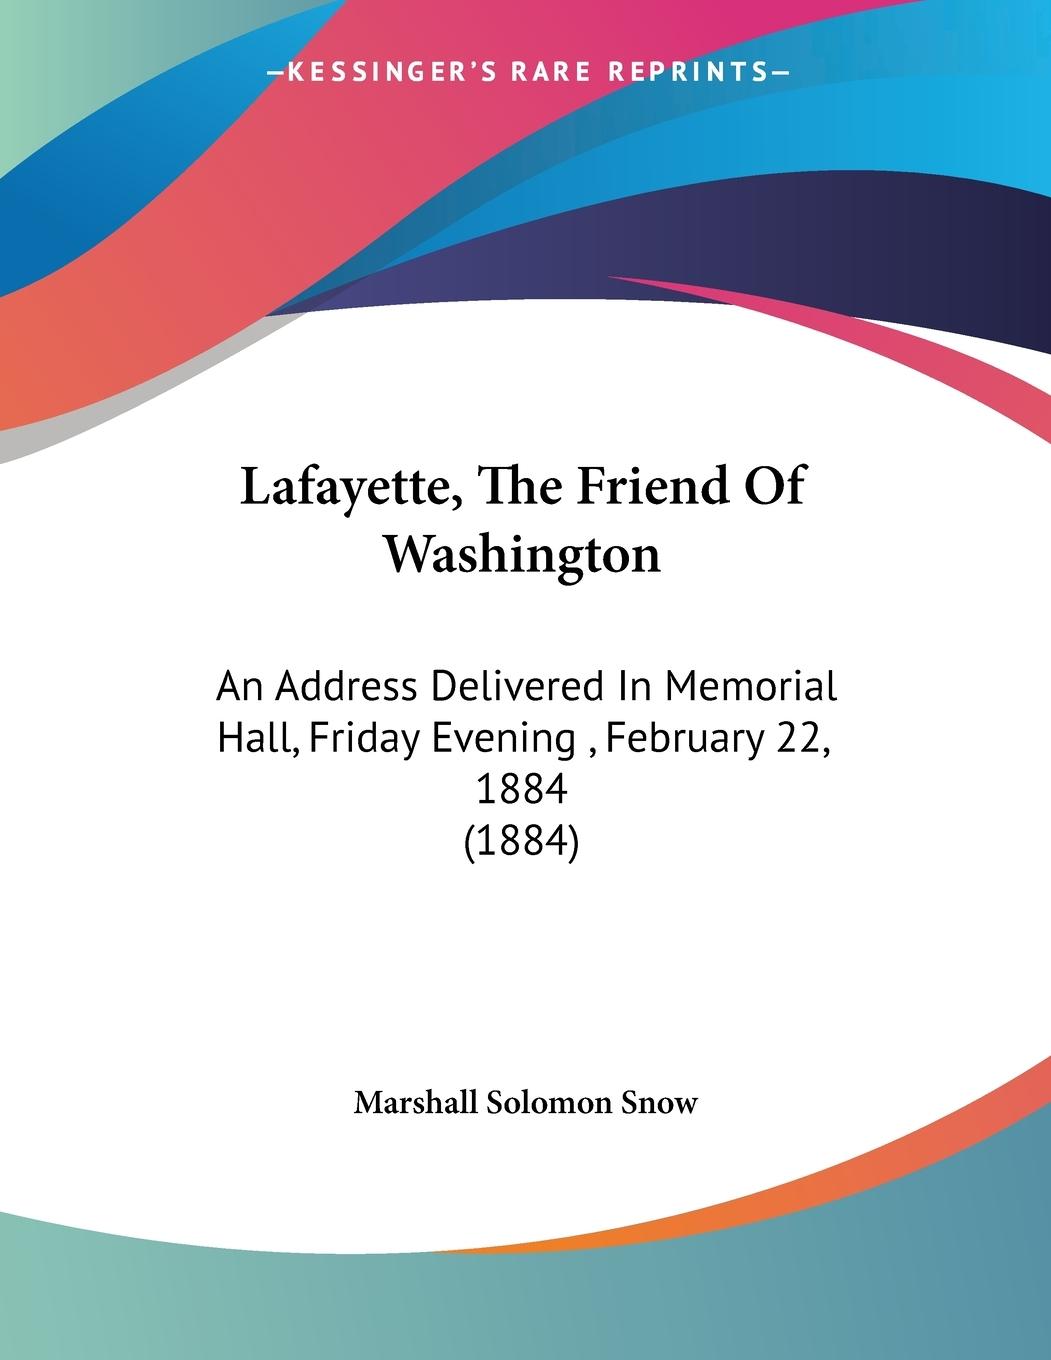 Lafayette, the Friend of Washington: An Address Delivered in Memorial Hall, Friday Evening, February 22, 1884 (1884)